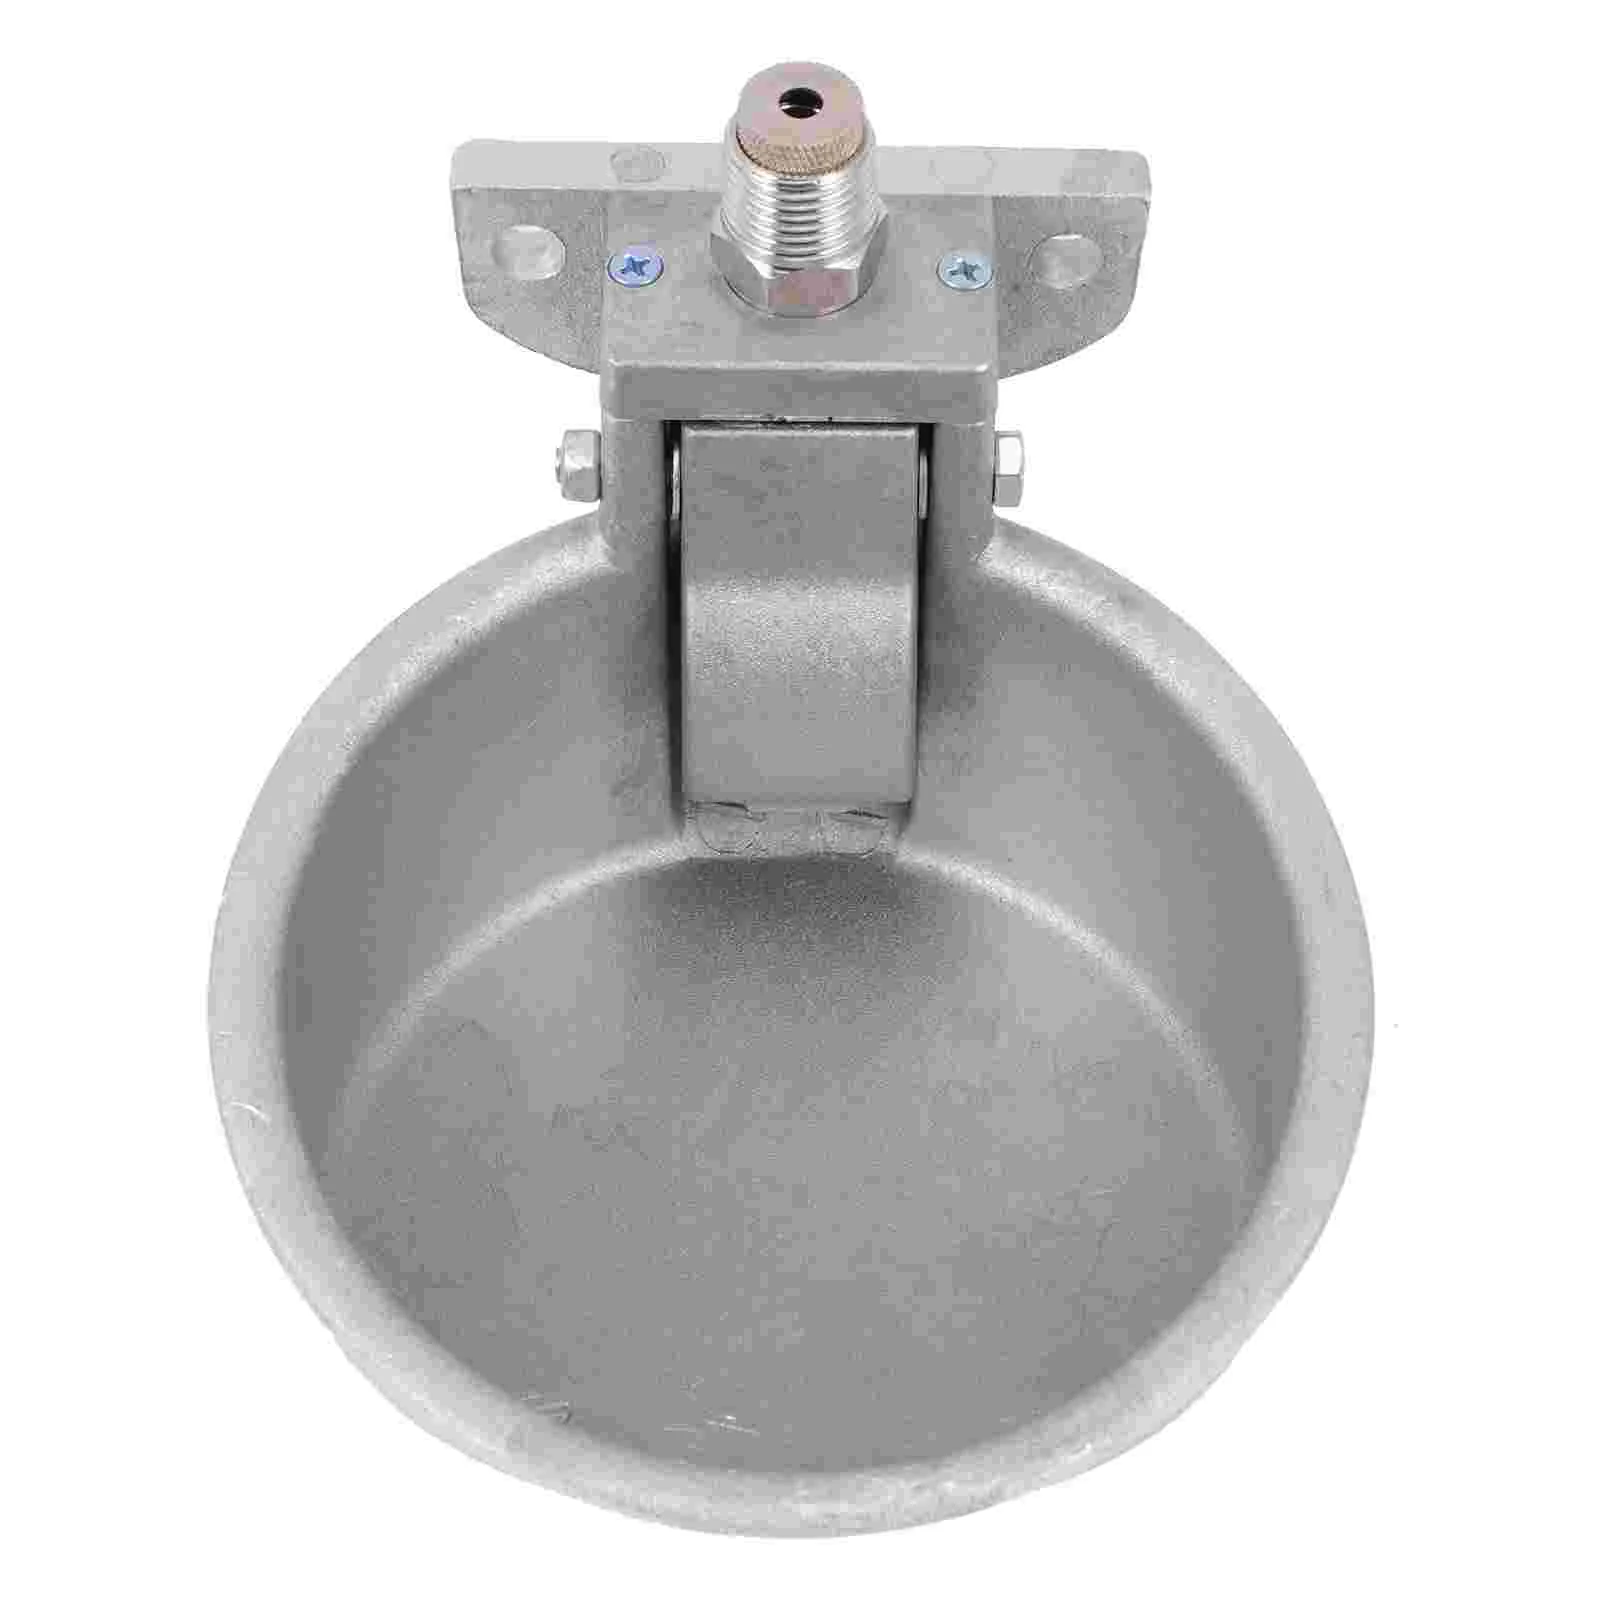 

Water Bowl Drinking Livestock Automaticwaterer Cow Dispenser Fountain Feeder Horse Supplies Farm Pet Cattle Station Feeding